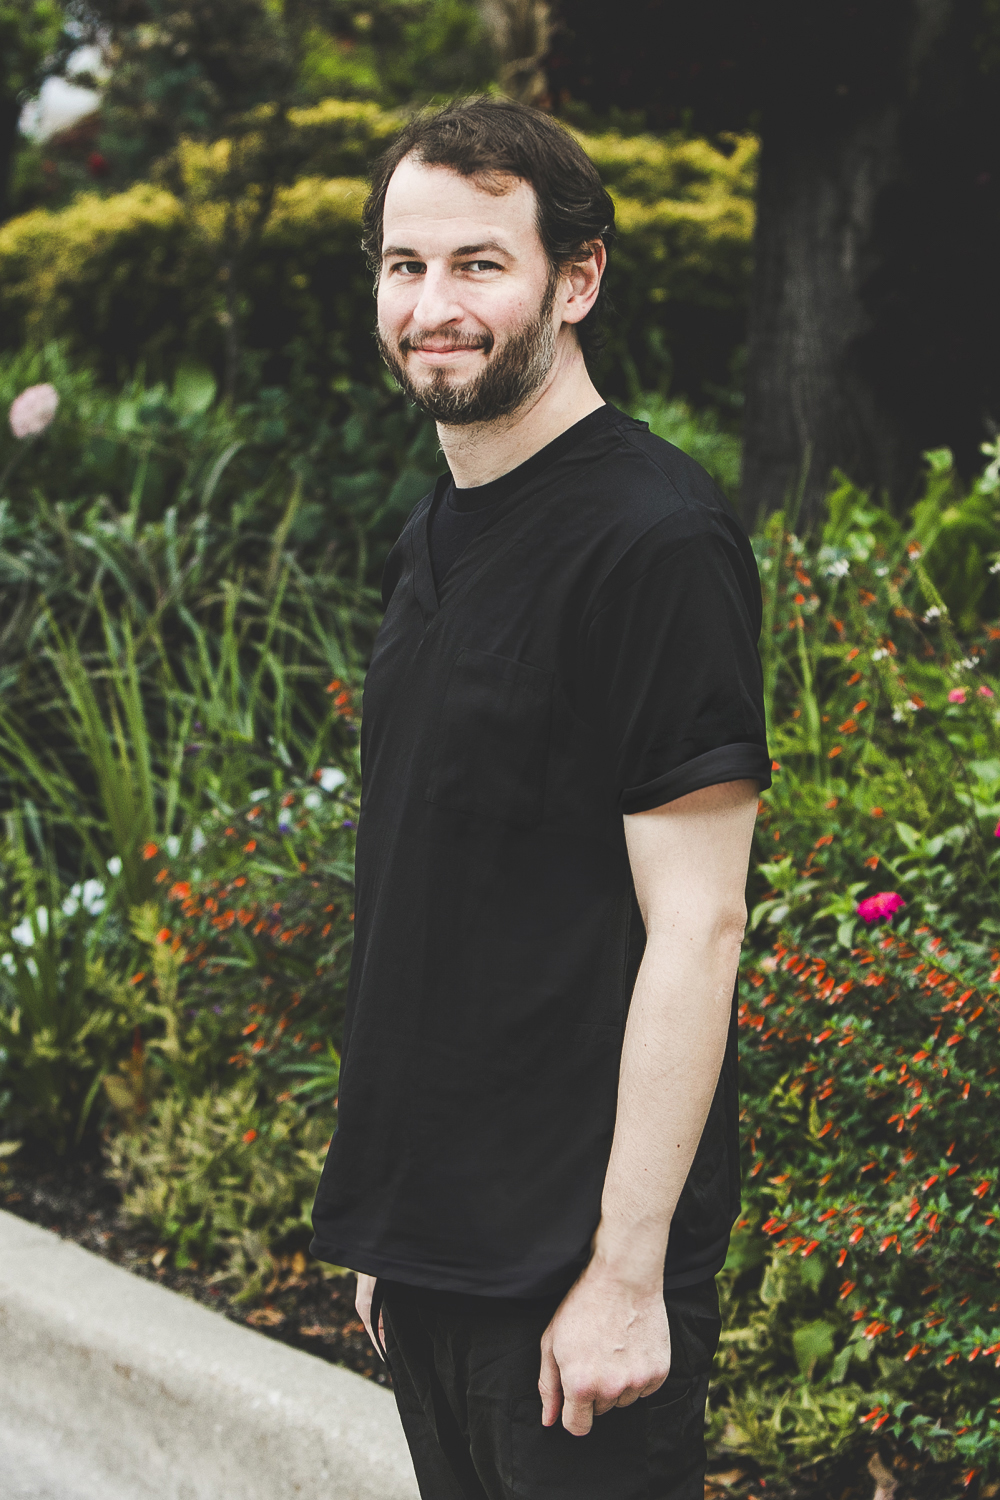 A man with a fair, complexion, short, wavy brown hair and brown beard with flecks of grey and wearing a black medical outfit is seen standing in front of an urban garden on a bright summer day